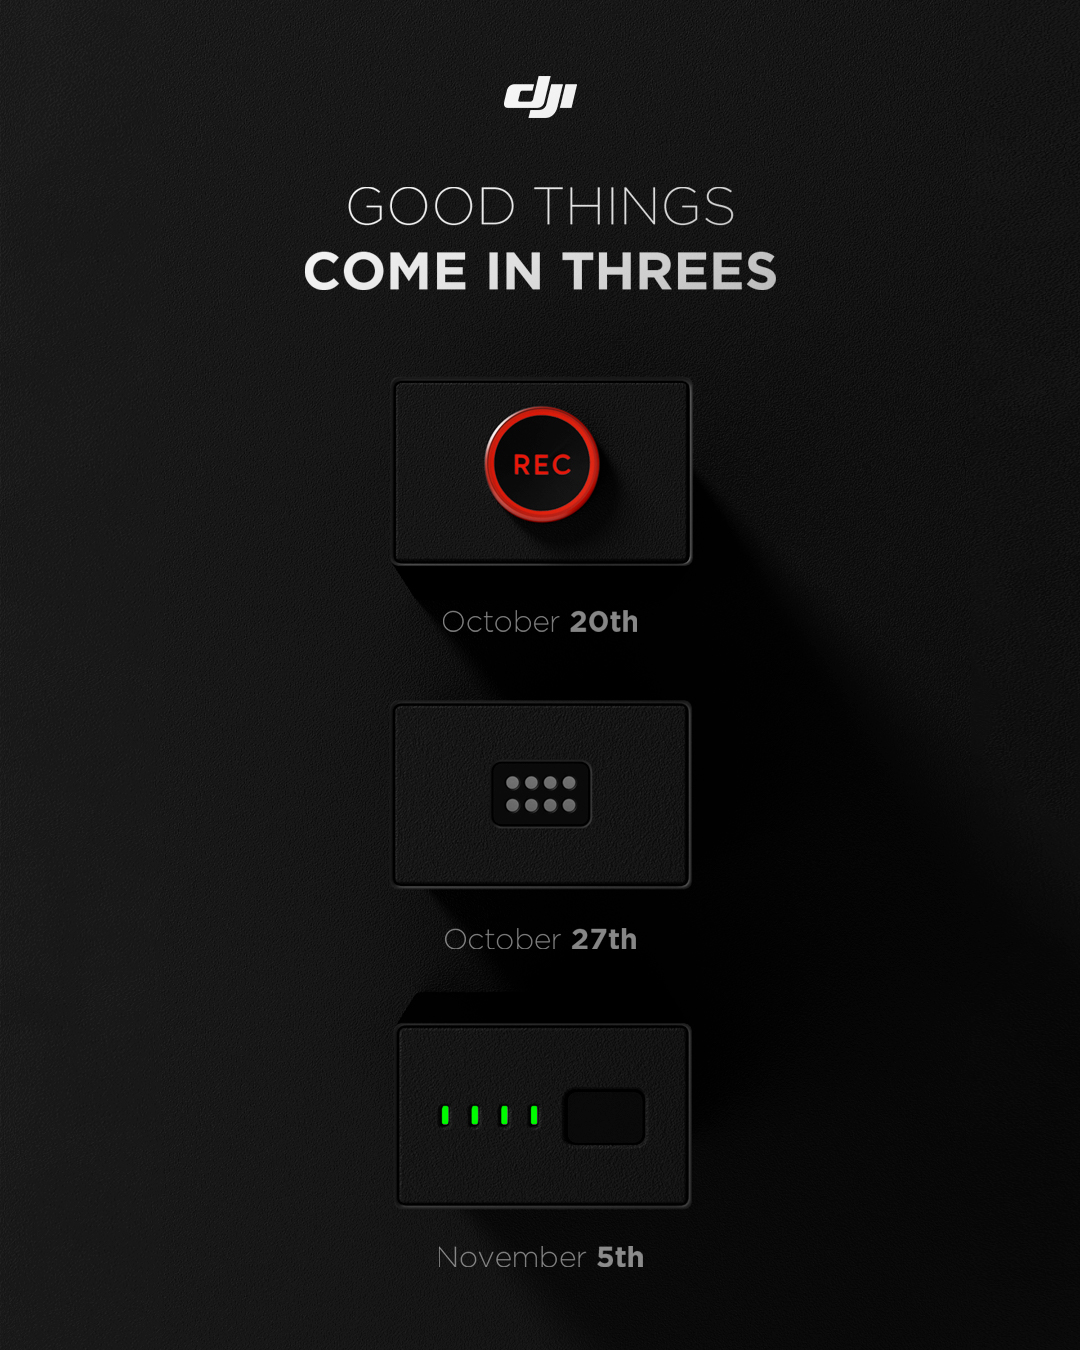 3 release dates for DJI products, Rec icon 20th oct, 8 dots in two lines - 28th oct, fully charged battery LEDs - 5th Nov 